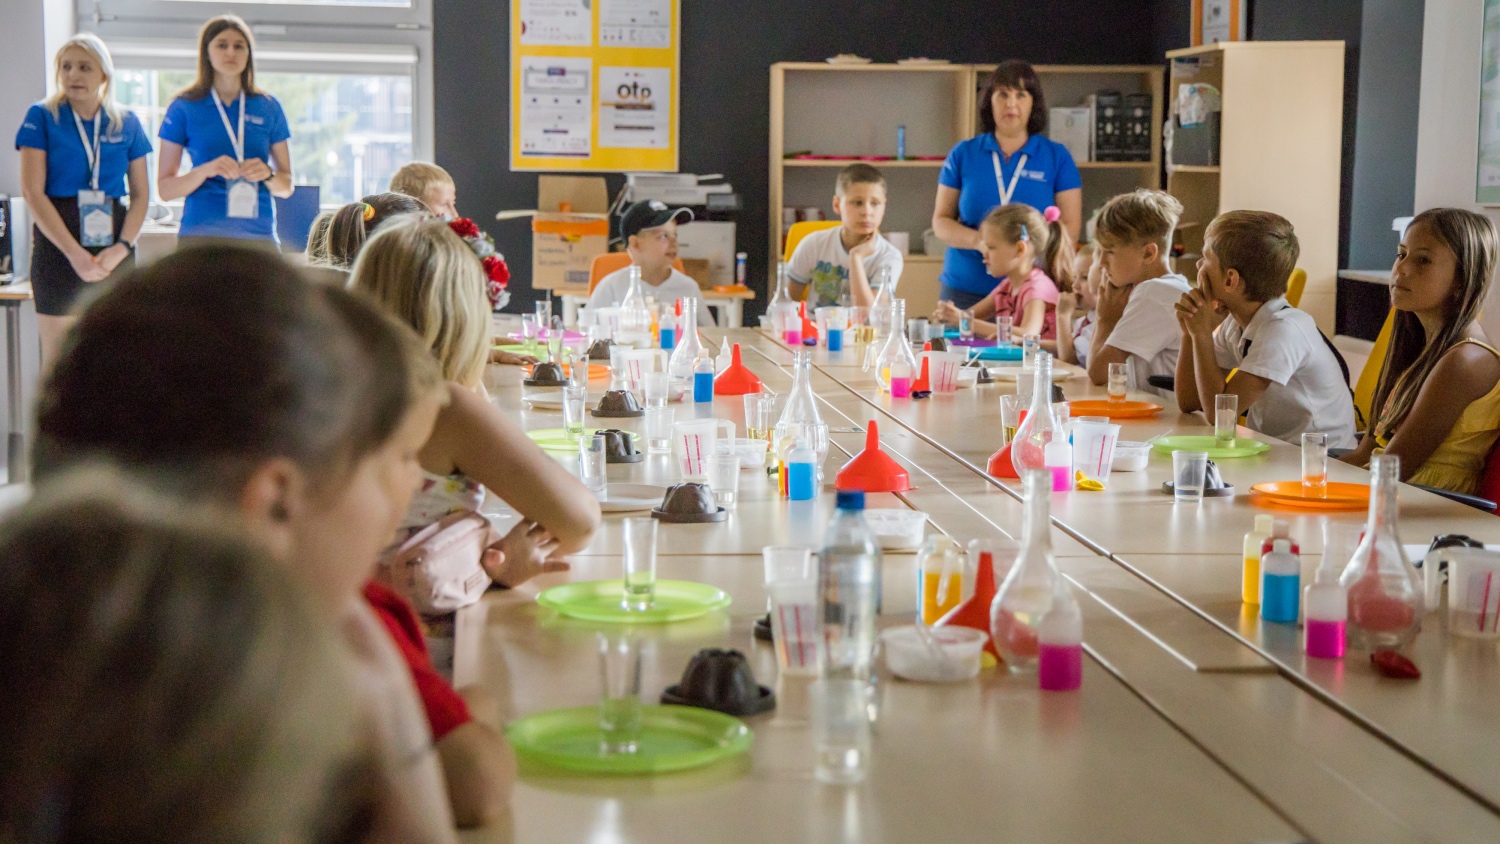 Energy Science Center - workshops through fun and experimentation delighted children from Ukraine